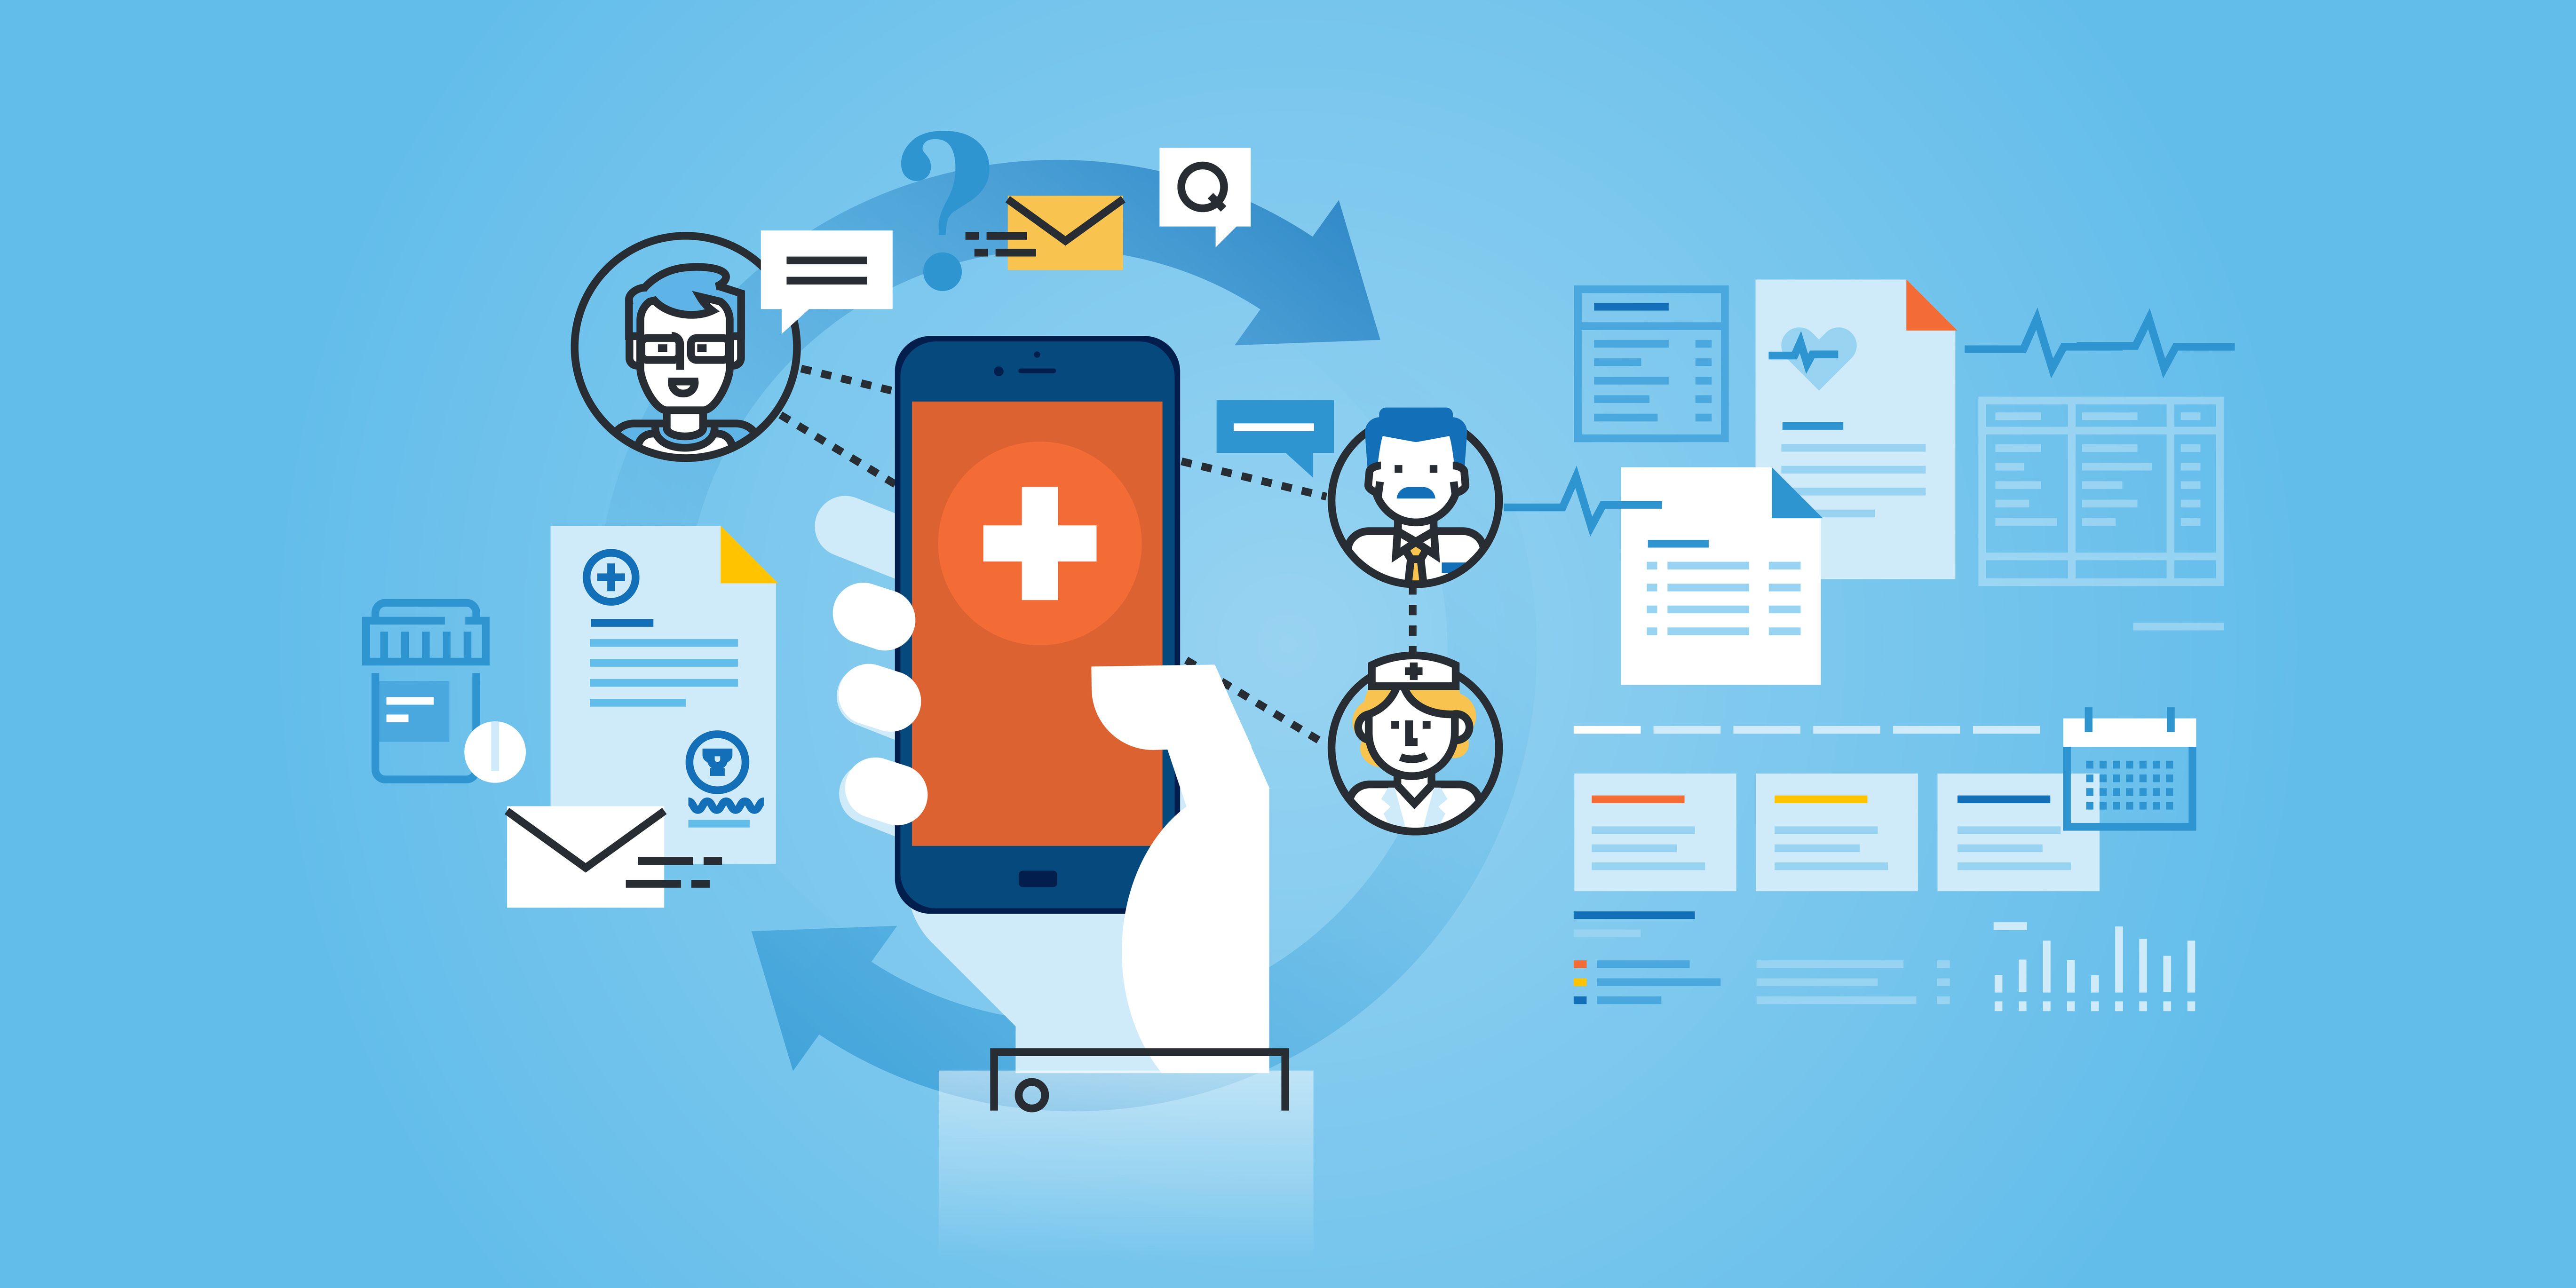 ONC: App integration with EHR on the rise